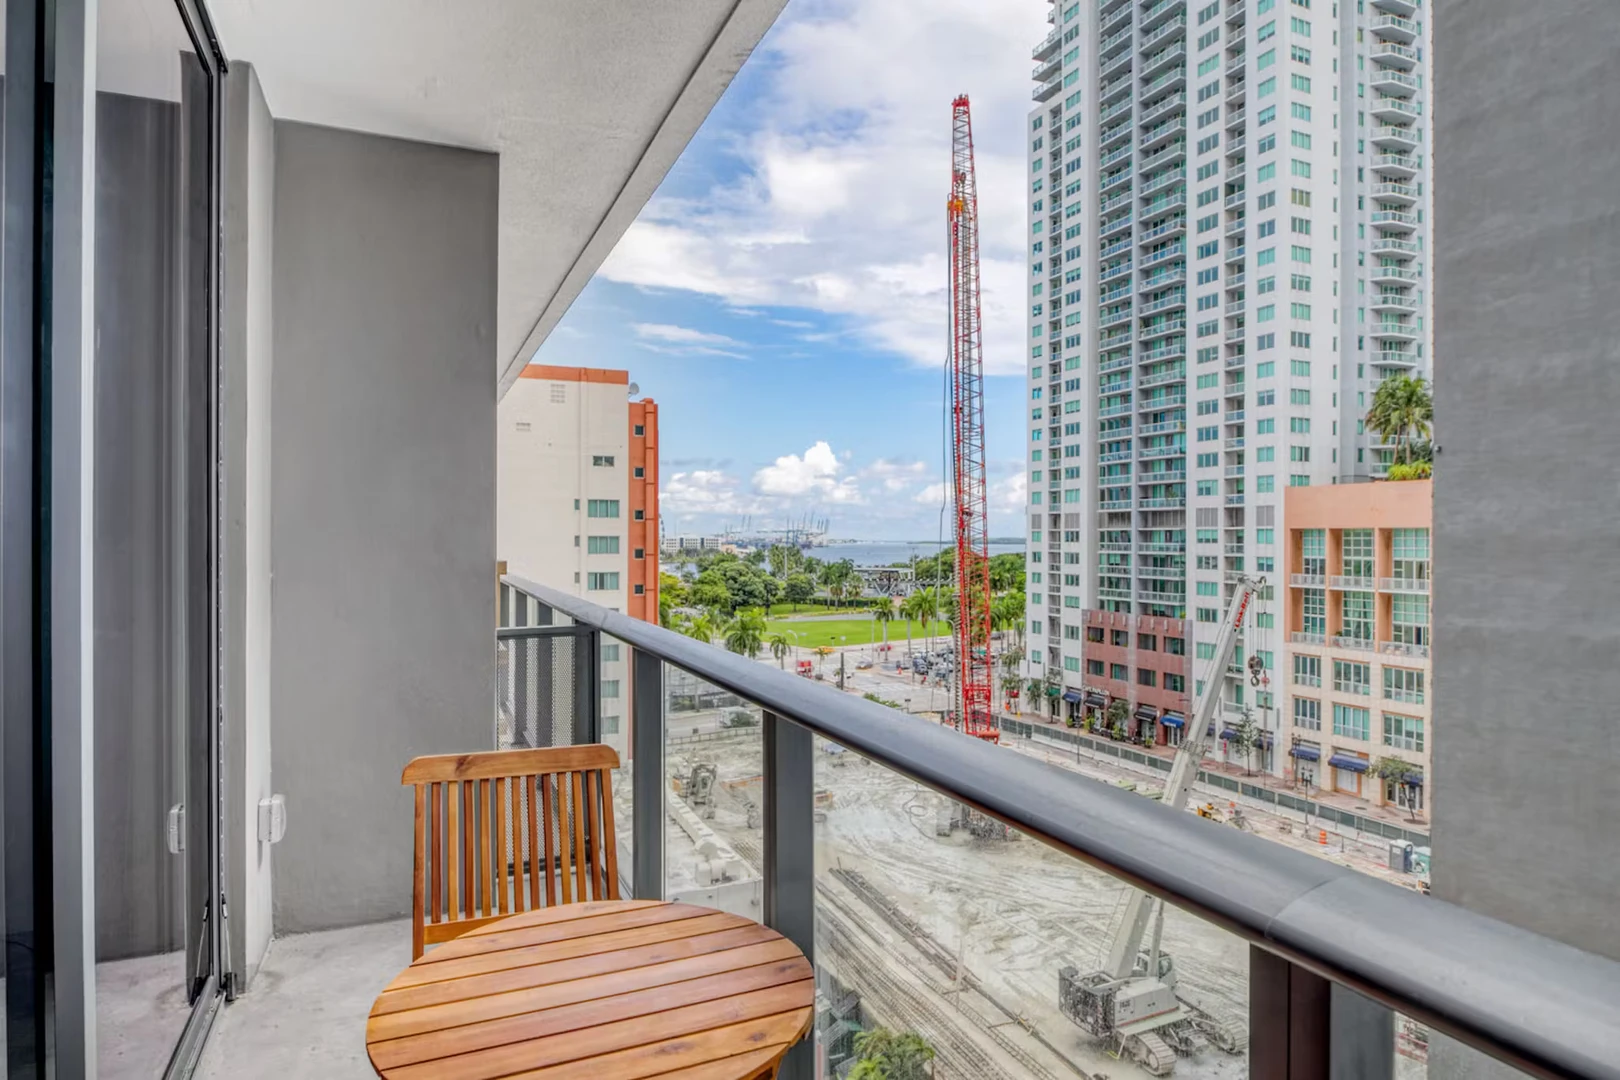 Accommodation with 3 bedrooms in Miami